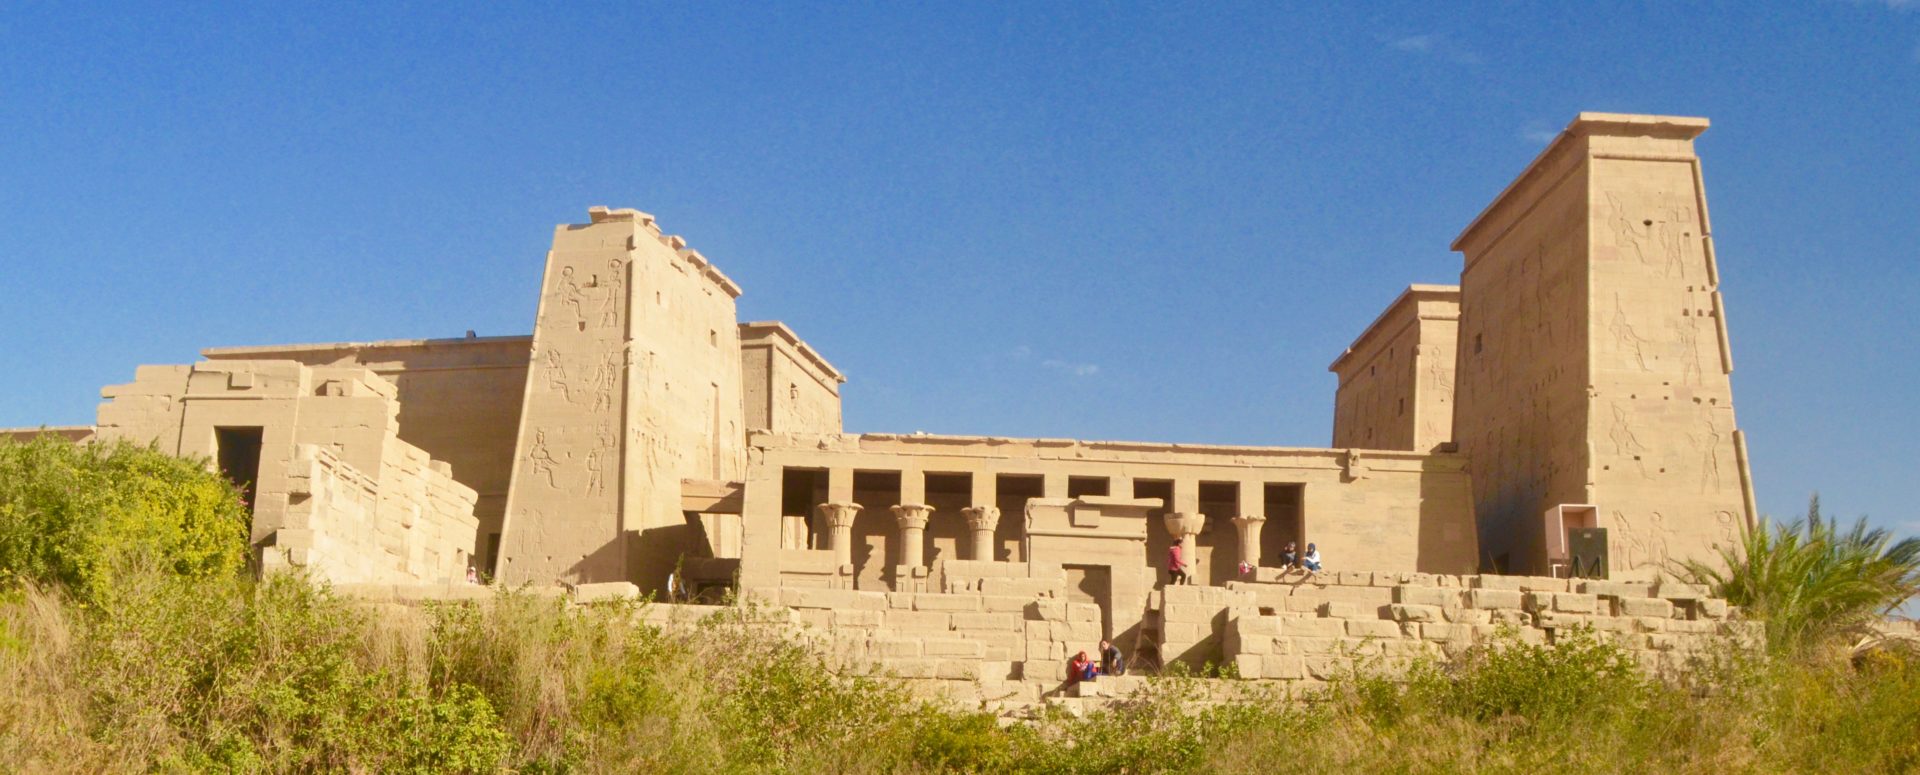 Philae Temples - Temple of Isis from the Nile